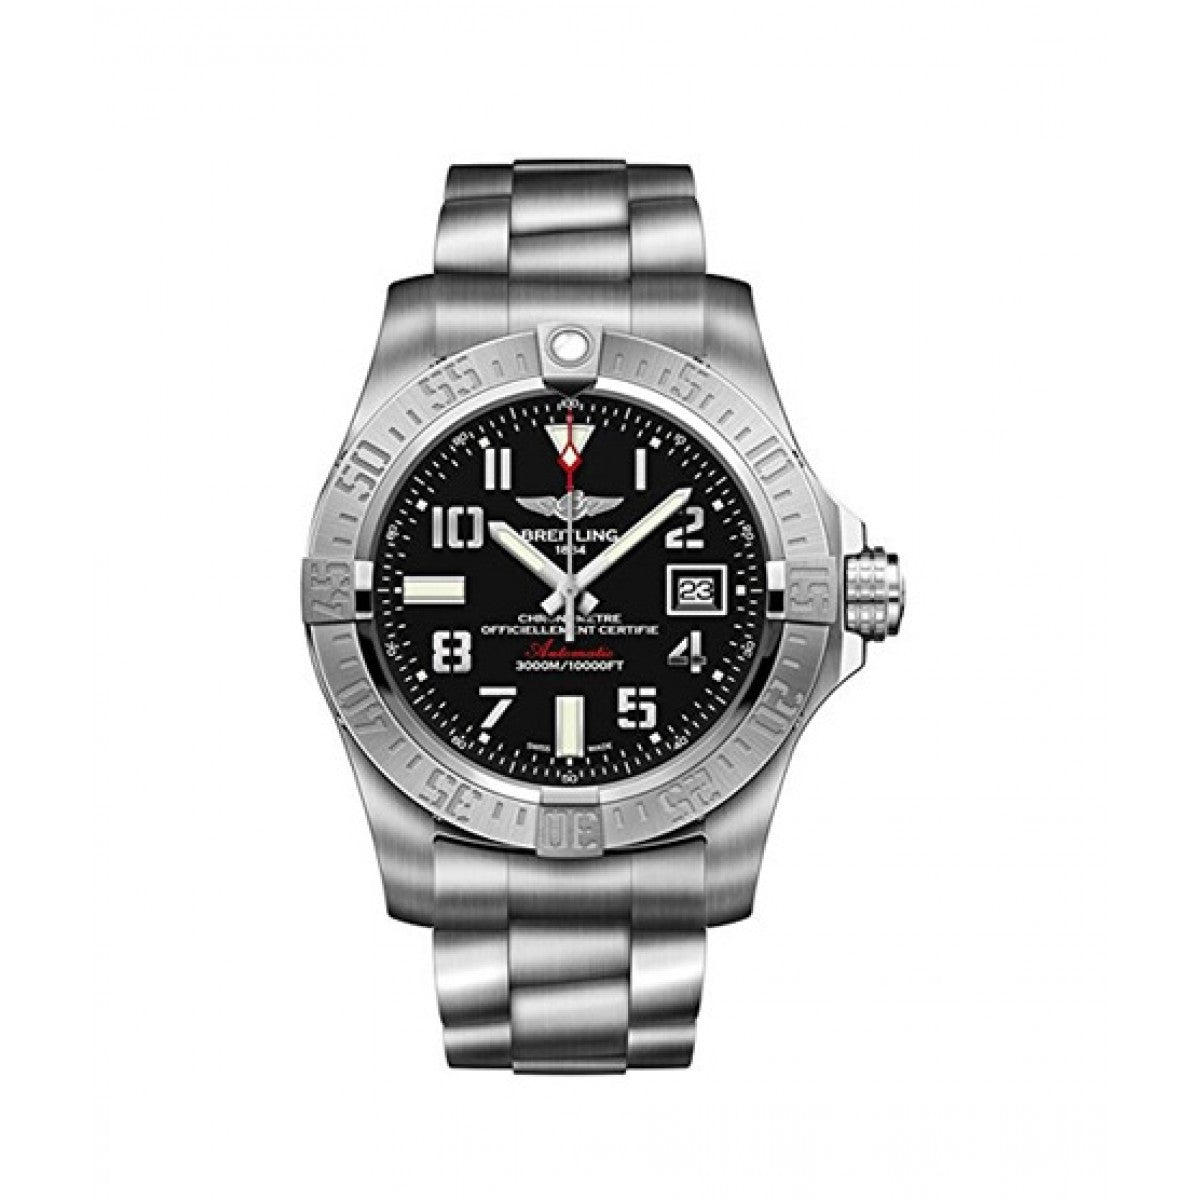 Breitling Avenger II Seawolf Stainless Steel 45mm Black Dial Mens Watch - A1733110/BC31